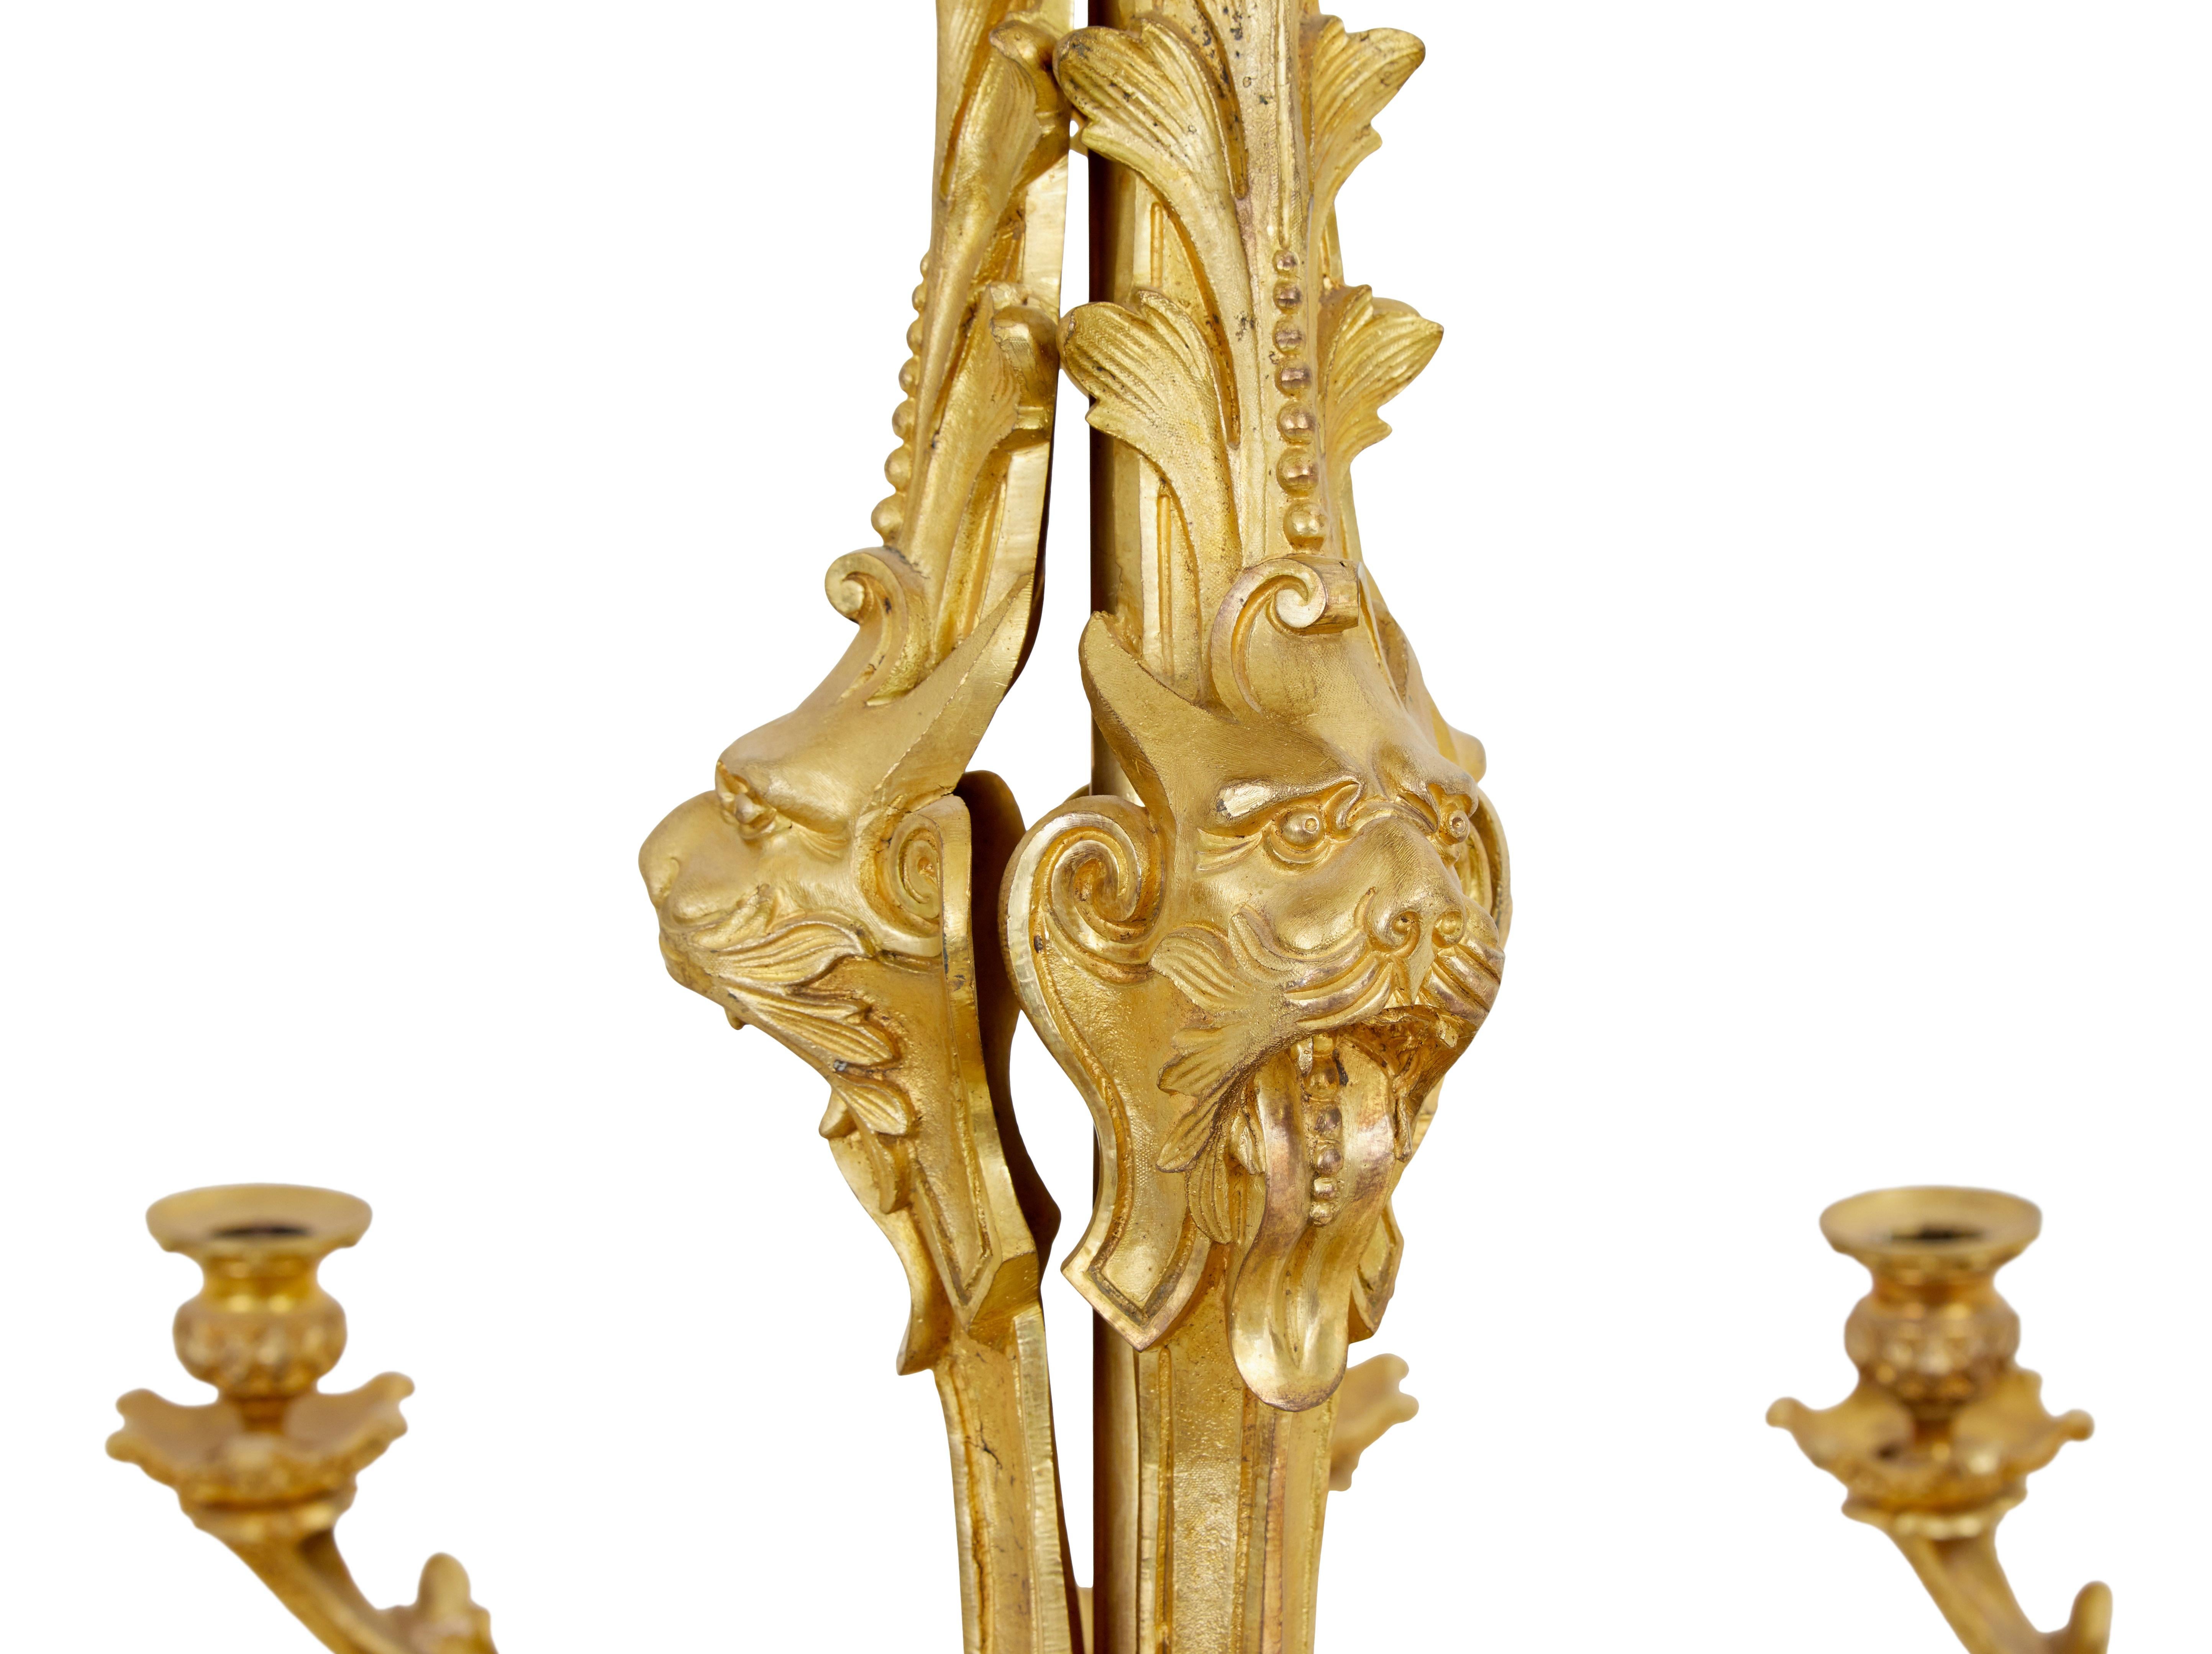 Rococo Revival 19th century French gilded ormolu 8-arm chandelier For Sale